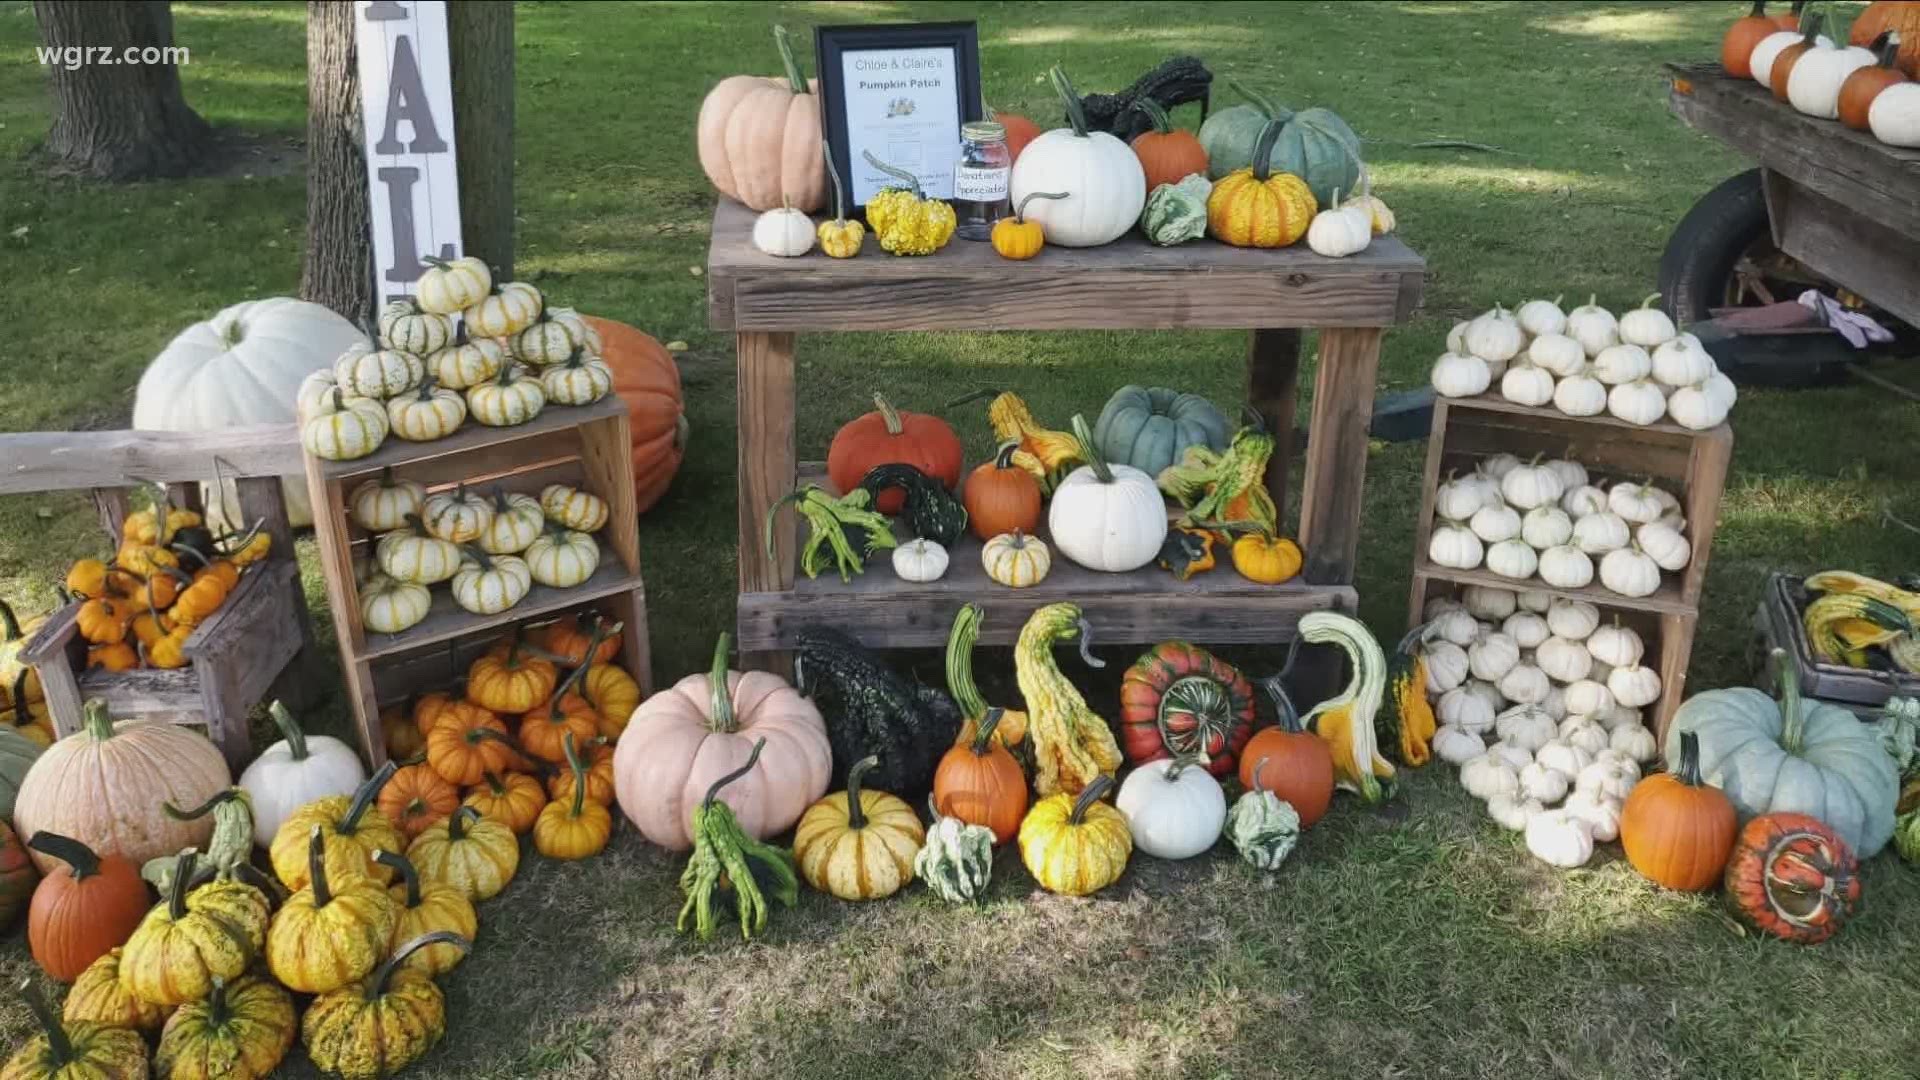 Visitors pay what they can afford at the Lamb family pumpkin stand in Genesee County. Every penny earned is donated to local charities, totaling $16,000 over 6 yrs.